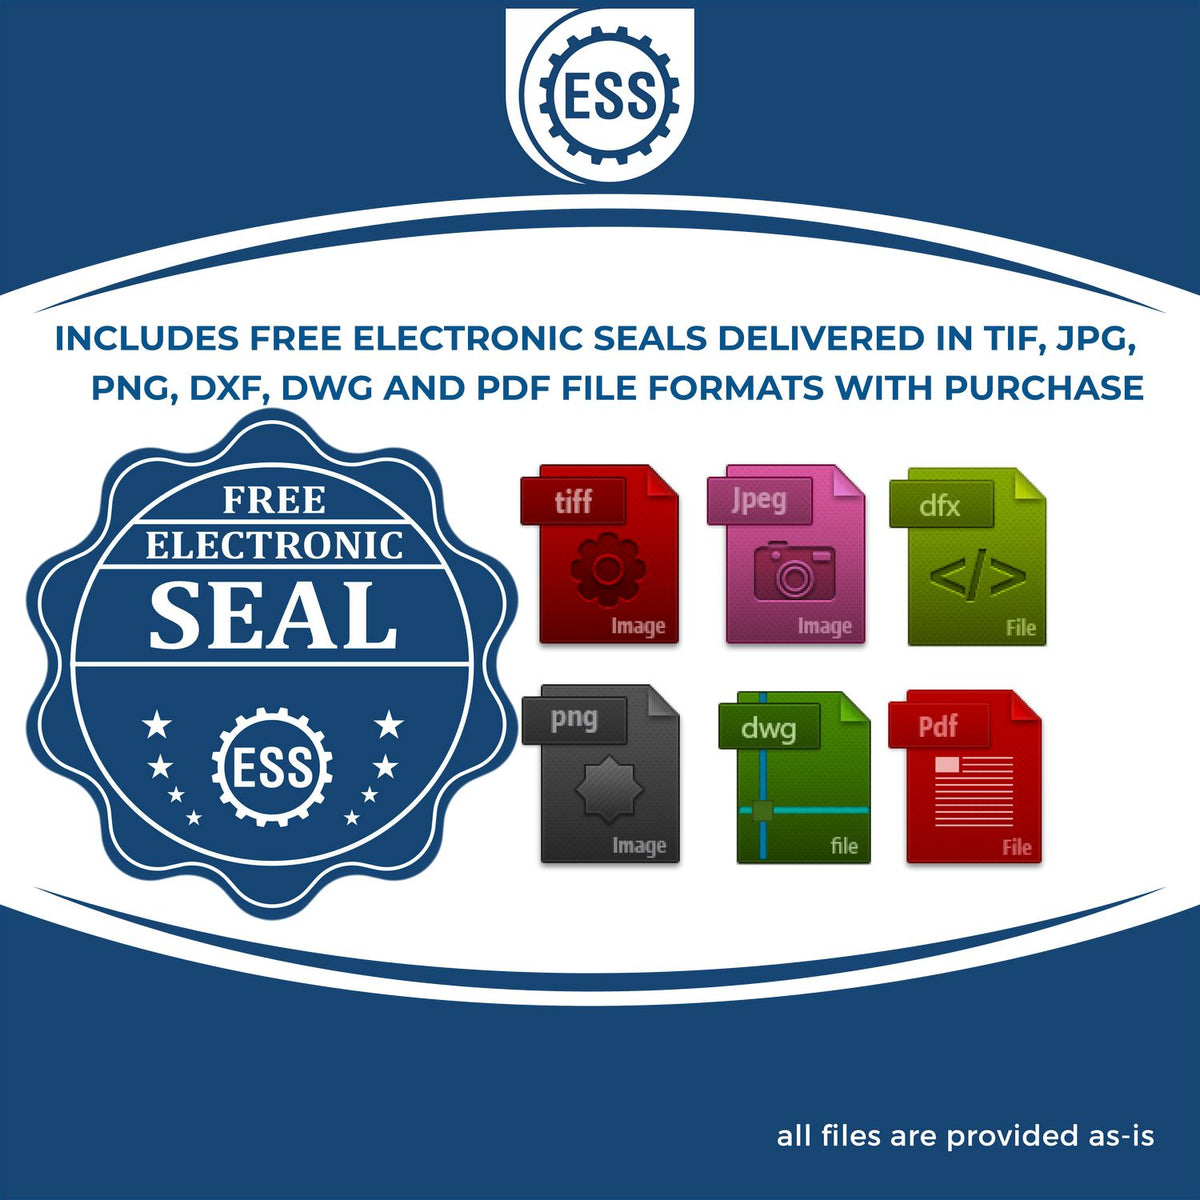 An infographic for the free electronic seal for the Premium MaxLight Pre-Inked Nebraska Engineering Stamp illustrating the different file type icons such as DXF, DWG, TIF, JPG and PNG.